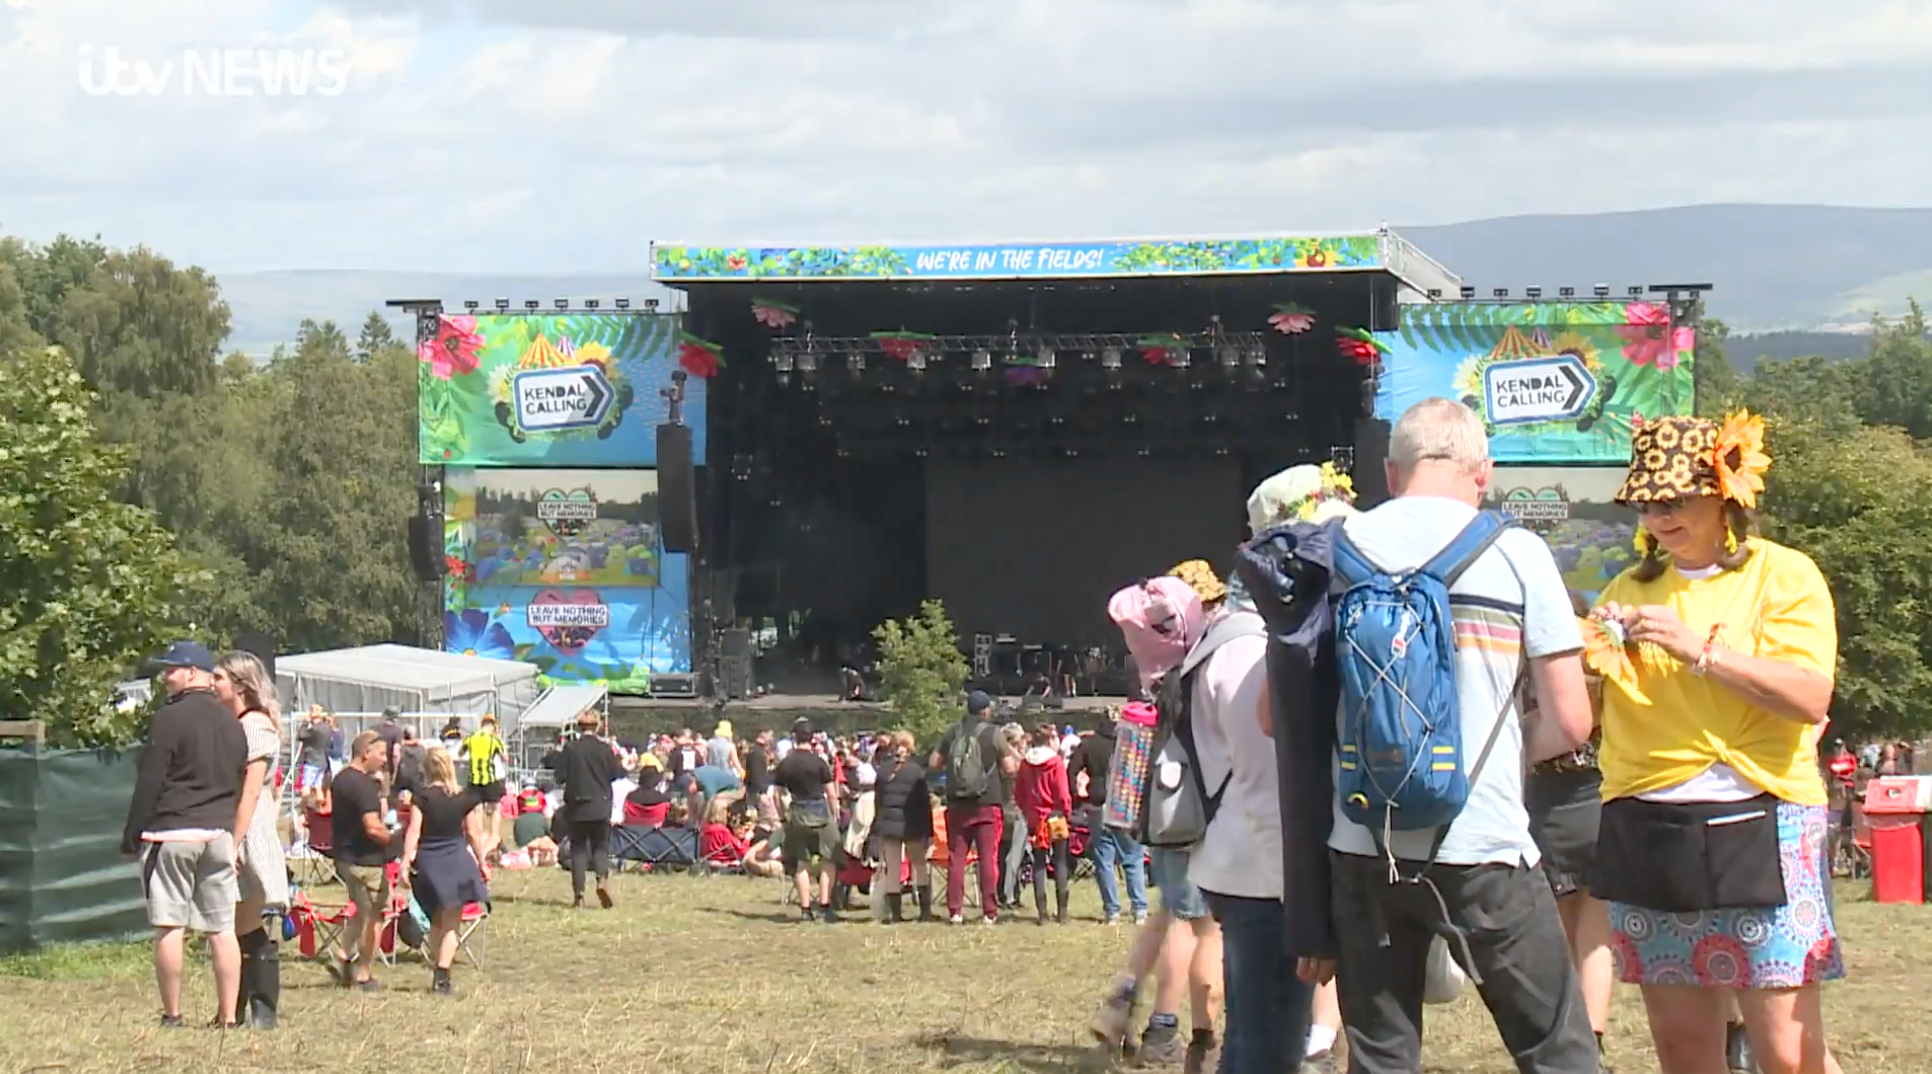 Thousands of music fans head to Cumbria for Kendal Calling